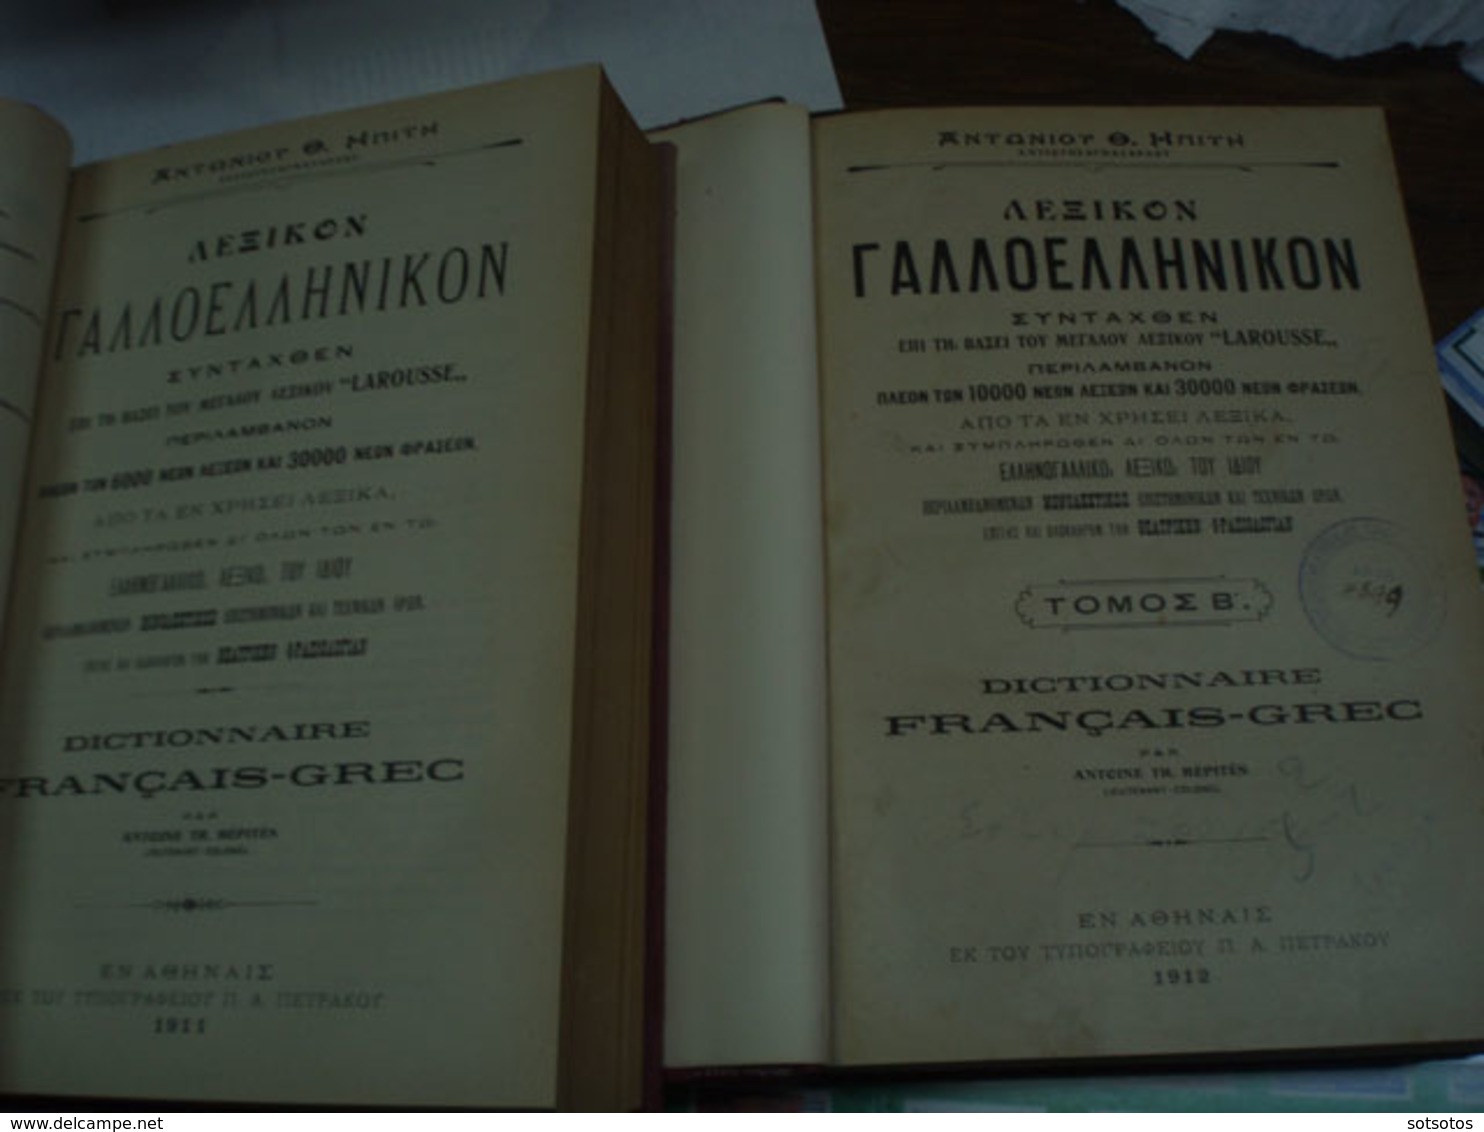 FRANCAIS-GREC: Ant. IPITI -  A' Vol. (1911) 1248+48 Pages, B' Vol.  (1912) 1344 Pages - Very Rare - Dictionnaires